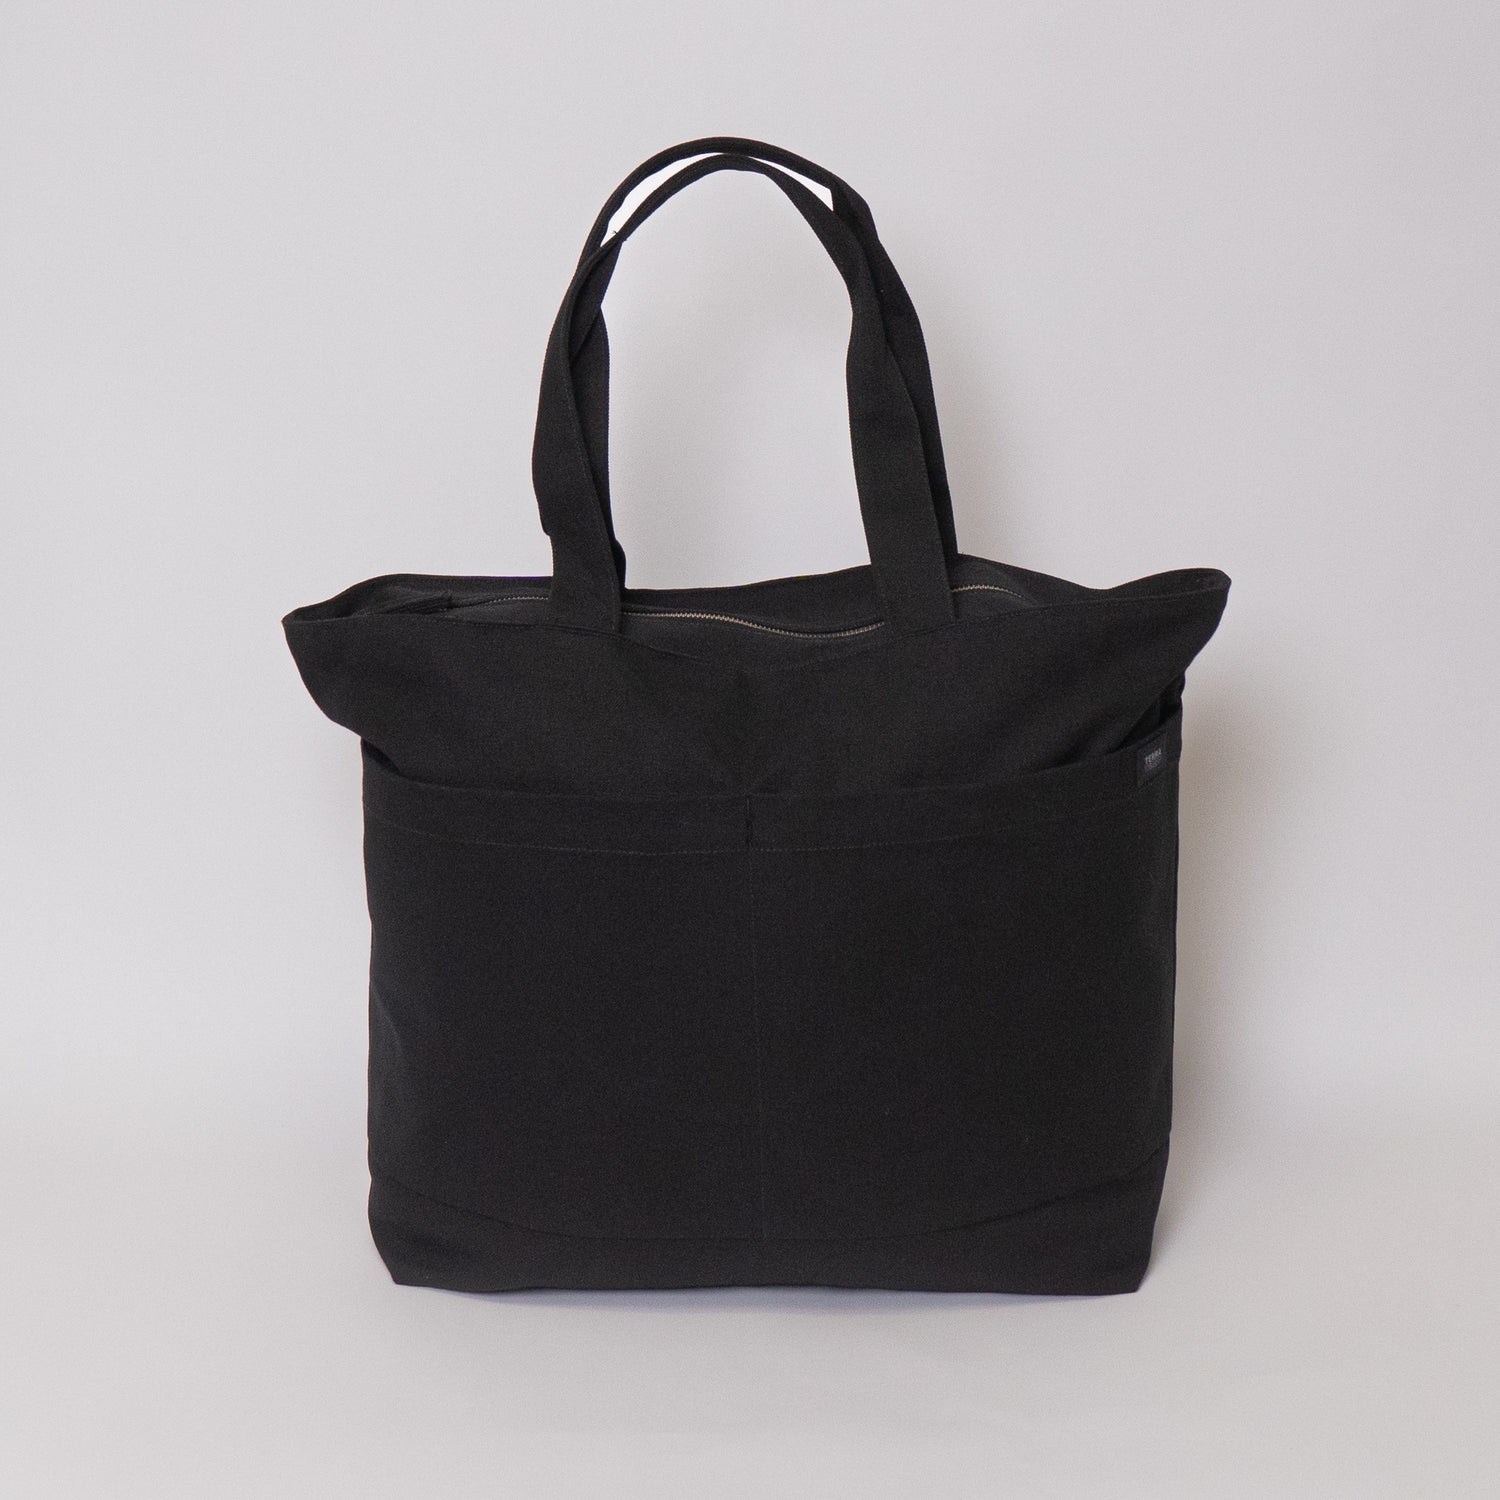 stylish tote bags for travel